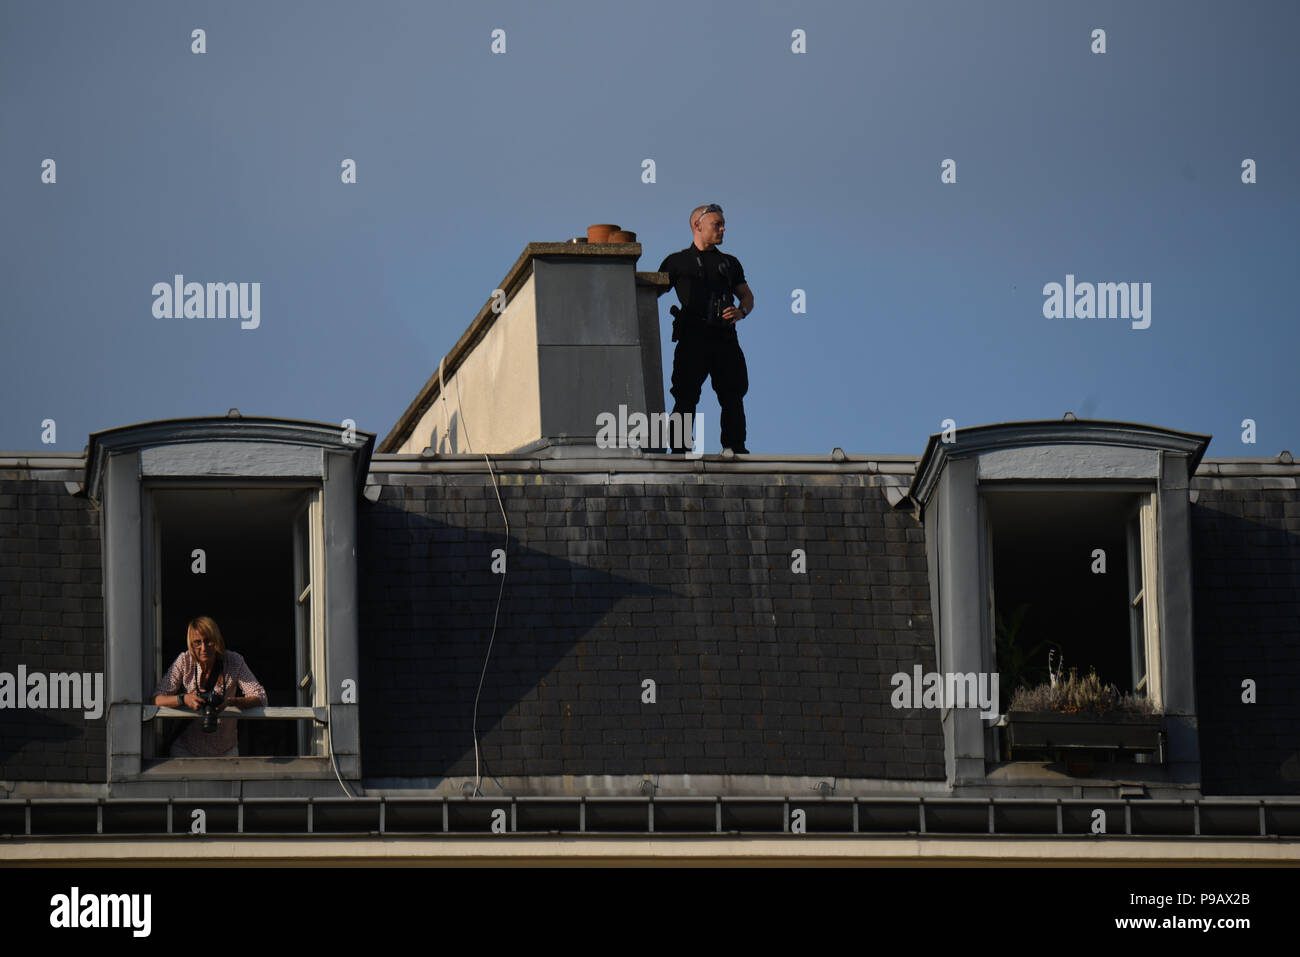 Paris, France. 16th July 2018. Police stand on the roof opposite the Elysee palace as the French football team head to the Elysee palace in the wake of France's World Cup victory. Des policiers sur les toits opposes a l'Elysee alors que le palais présidentiel se prepare a accueillir la reception en l'honneur des champions du monde de football. *** FRANCE OUT / NO SALES TO FRENCH MEDIA *** Credit: Idealink Photography/Alamy Live News Stock Photo